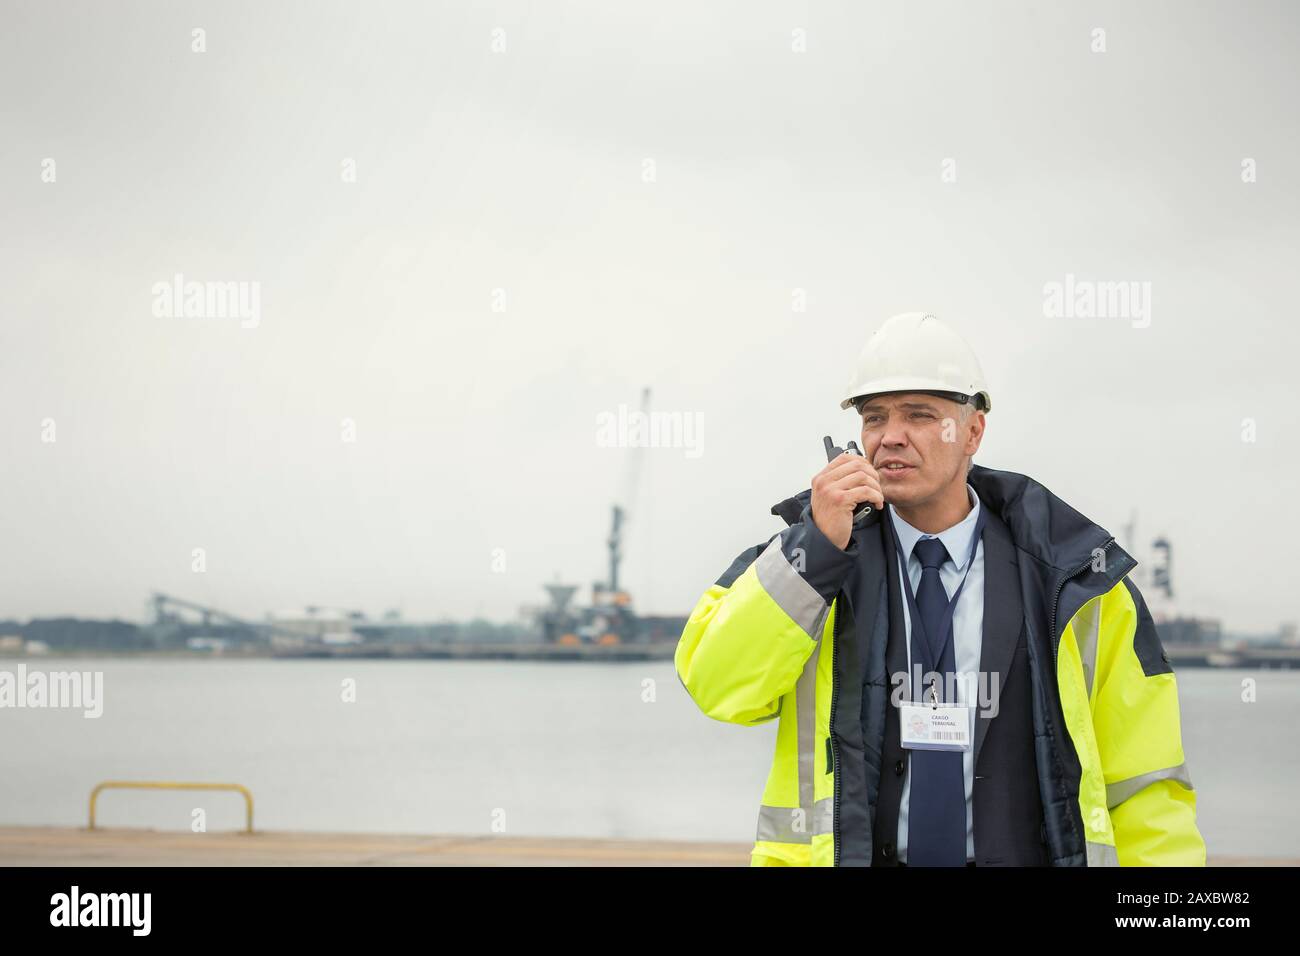 Dock manager using walkie-talkie at commercial dock Stock Photo